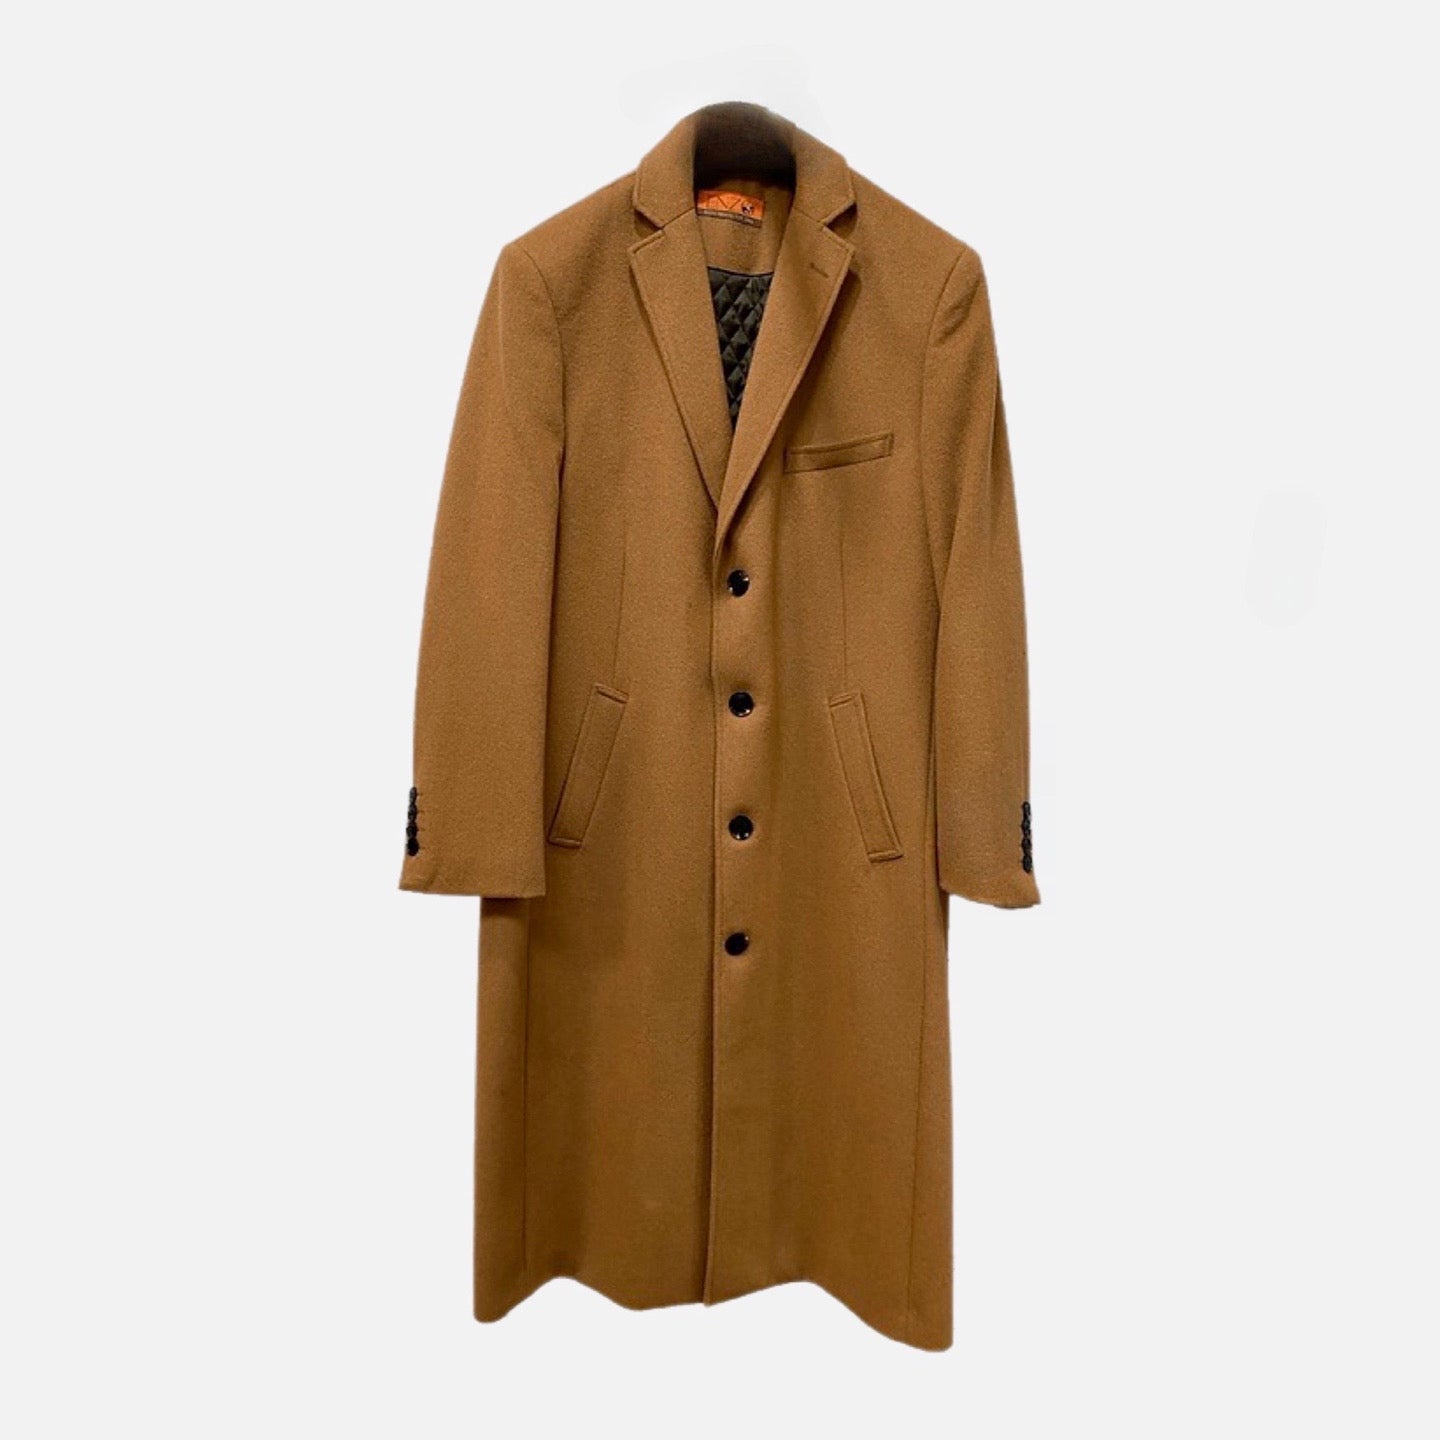 Men's Camel Wool and Cashmere Overcoat | Classic Winter Staple